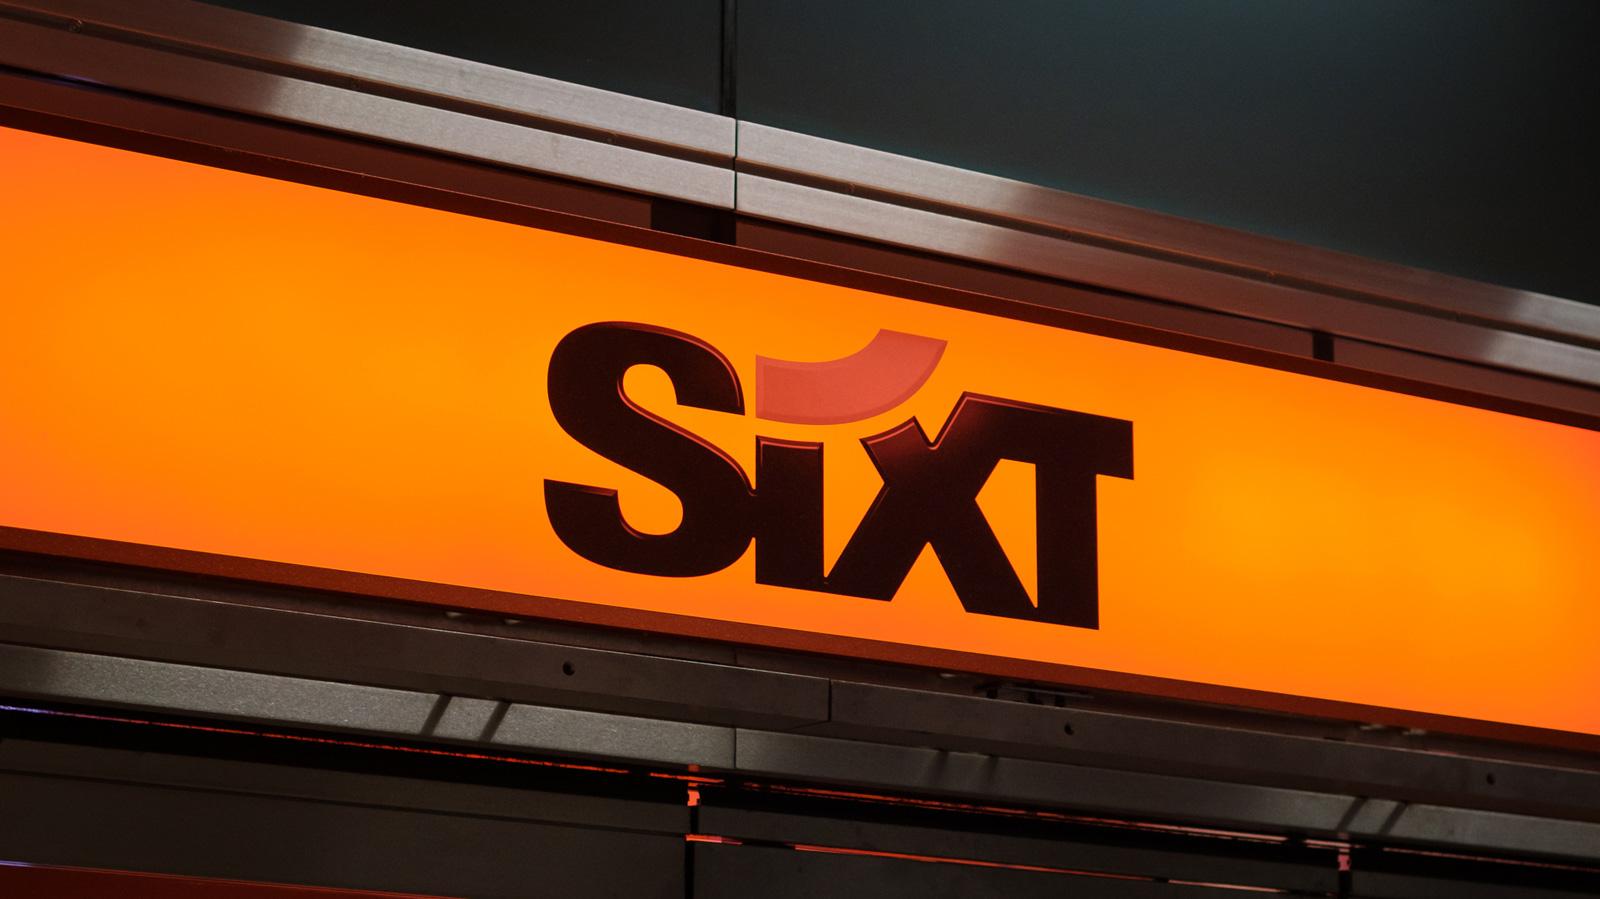 Car Rental Giant Sixt Facing Disruptions Due To A Cyberattack